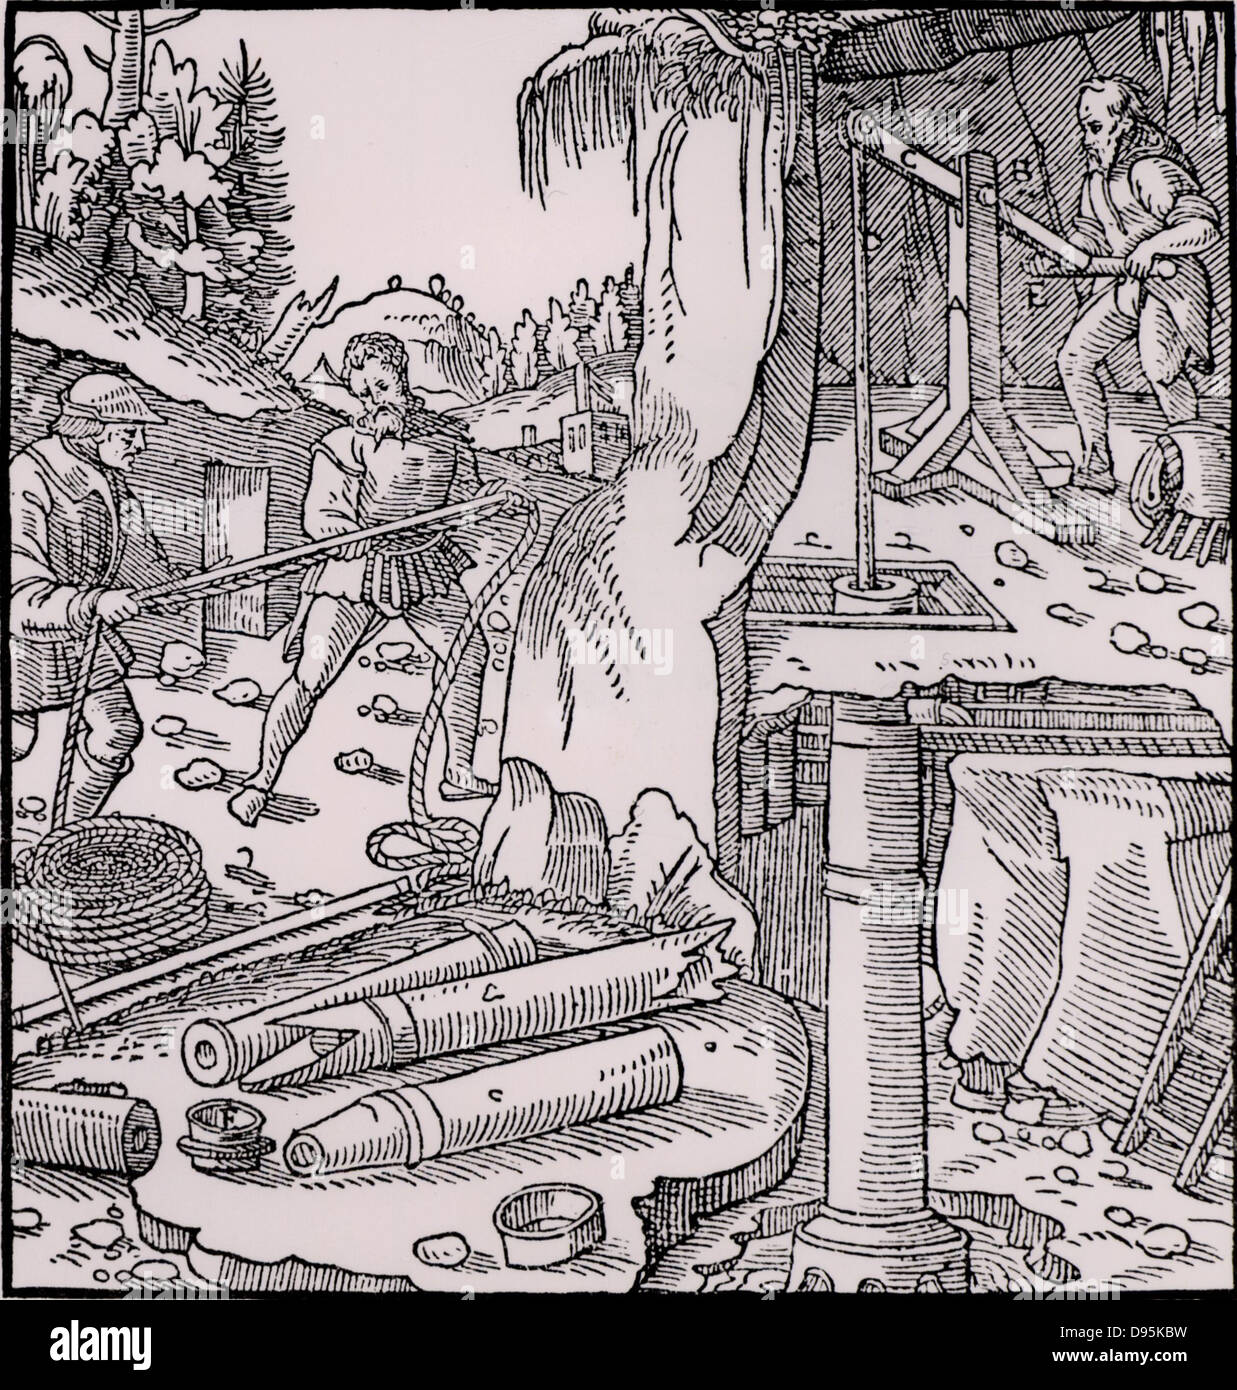 Draining a mine by means of a suction pump.  The man in the top right of the picture is operating the piston of the pump by raising and lowering the opposite end of the beam to which the piston rod is attached. From 'De re metallica', by Agricola, pseudonym of Georg Bauer (Basle, 1556).  Woodcut. Stock Photo